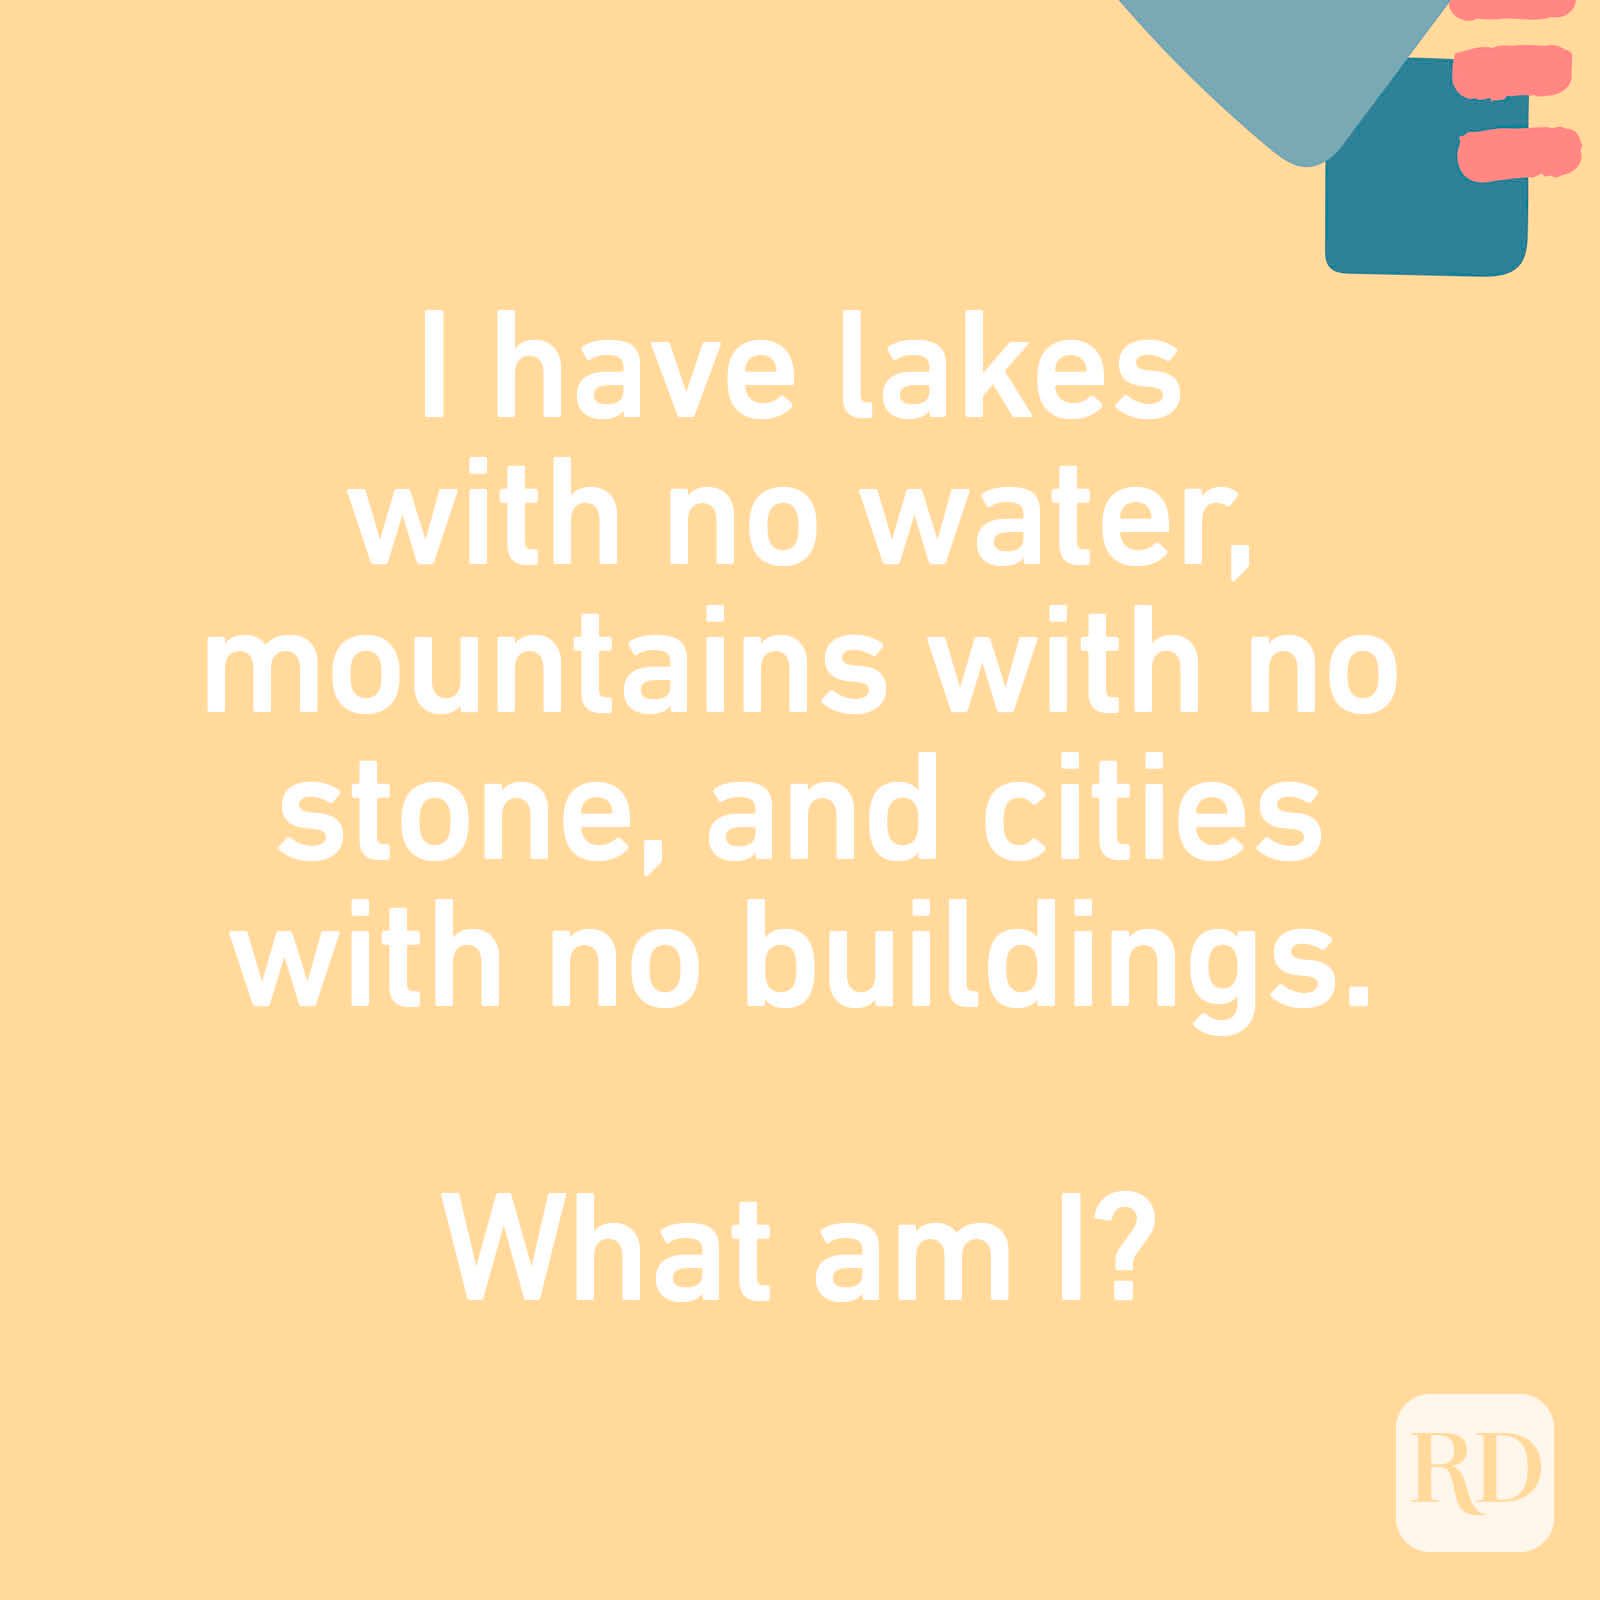 I have lakes with no water, mountains with no stone, and cities with no buildings. What am I?